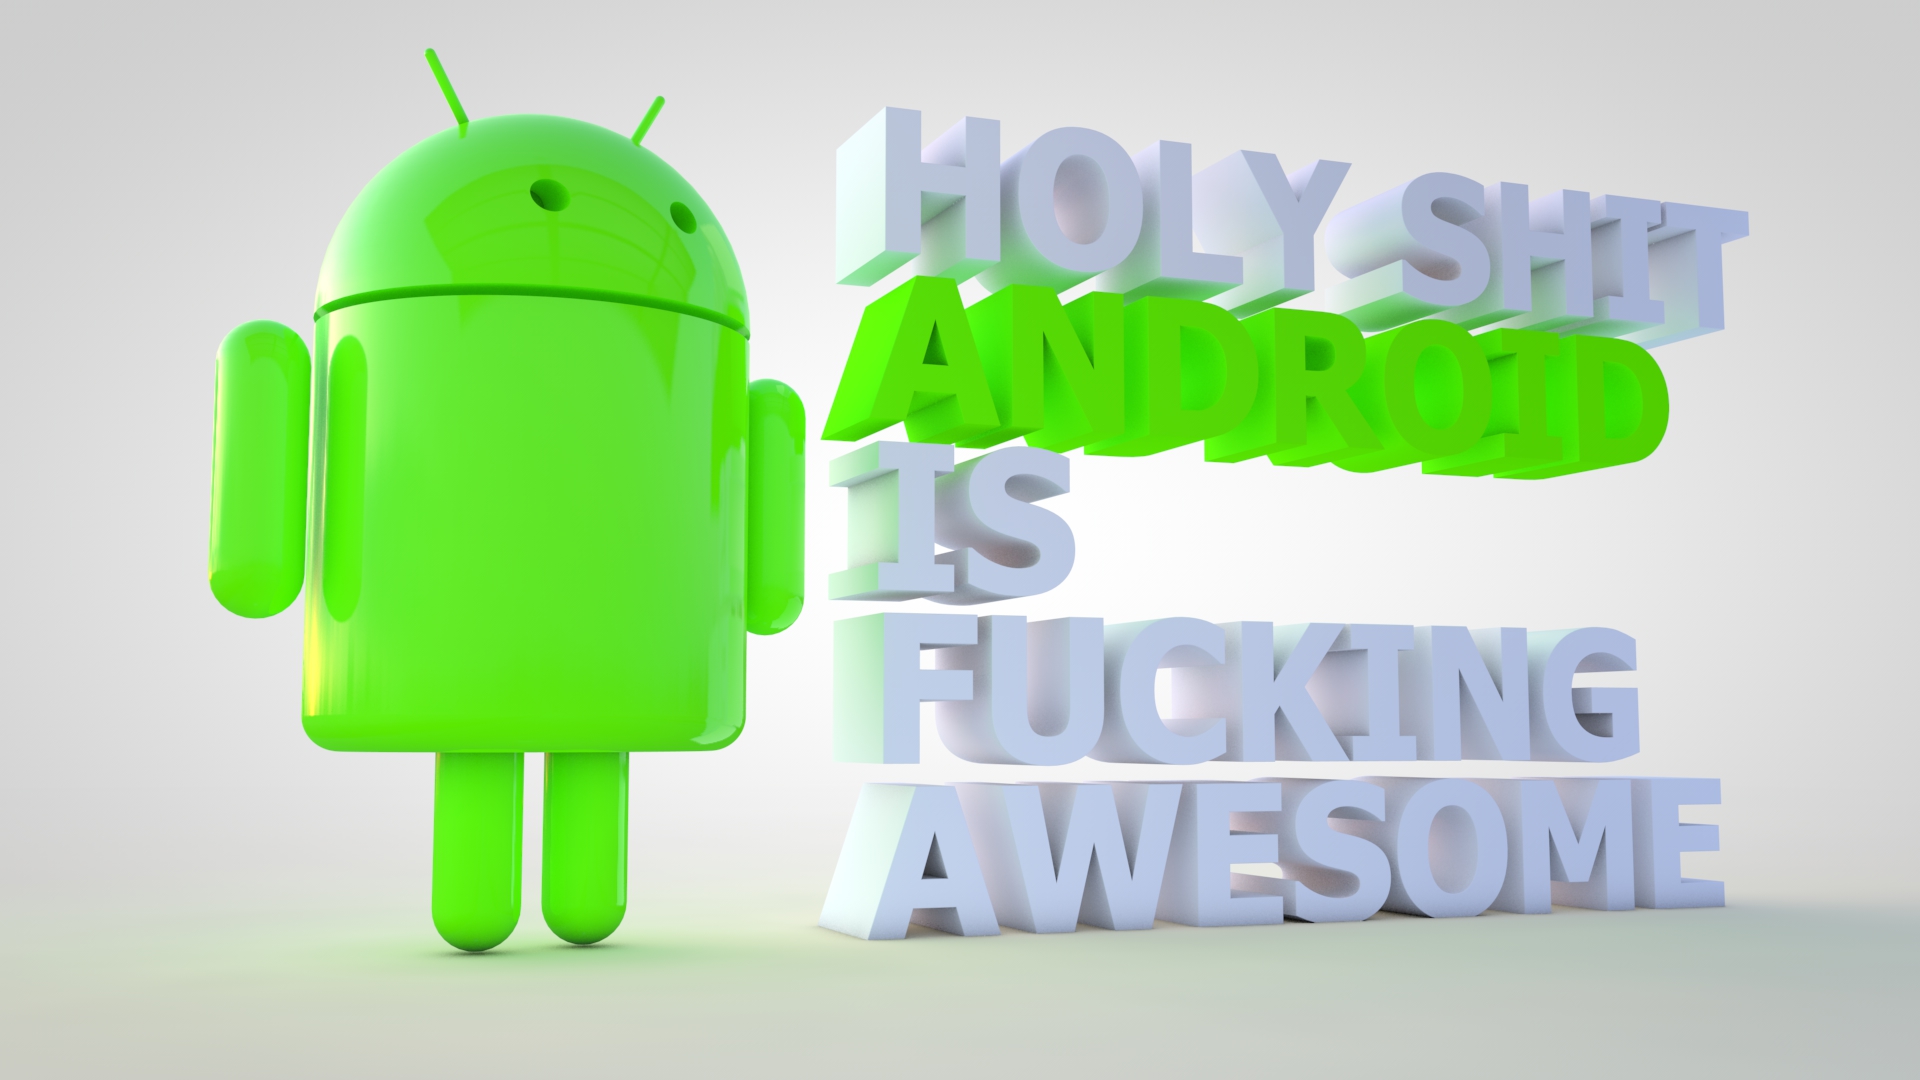 Awesome Android Wallpaper